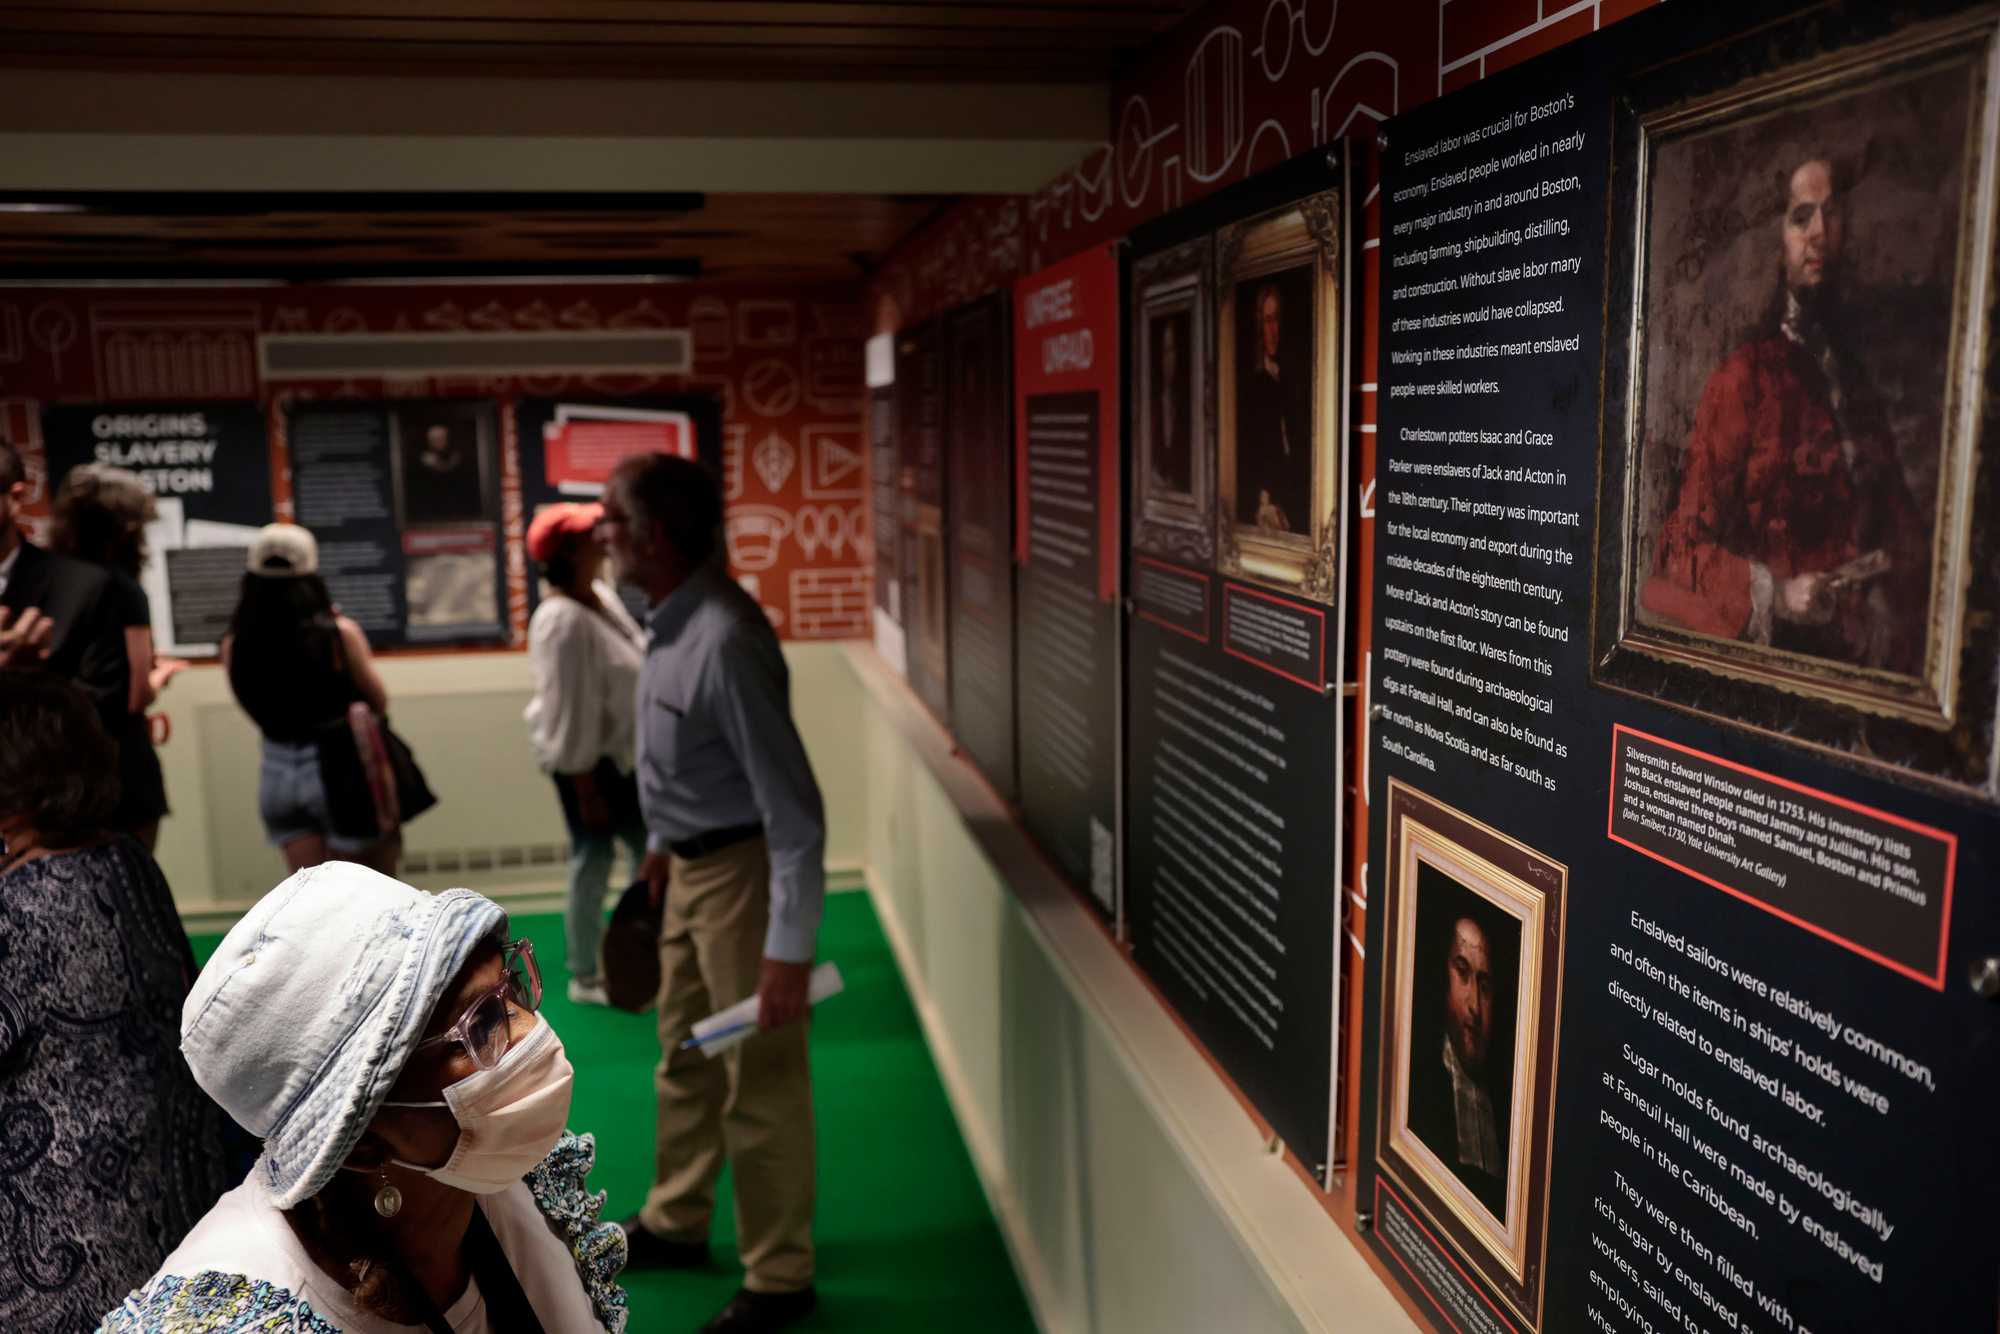 Kathryn Ehrhardt Mathews studied panels during an opening ceremony for a “Slavery in Boston” exhibit at Faneuil Hall on June 16.